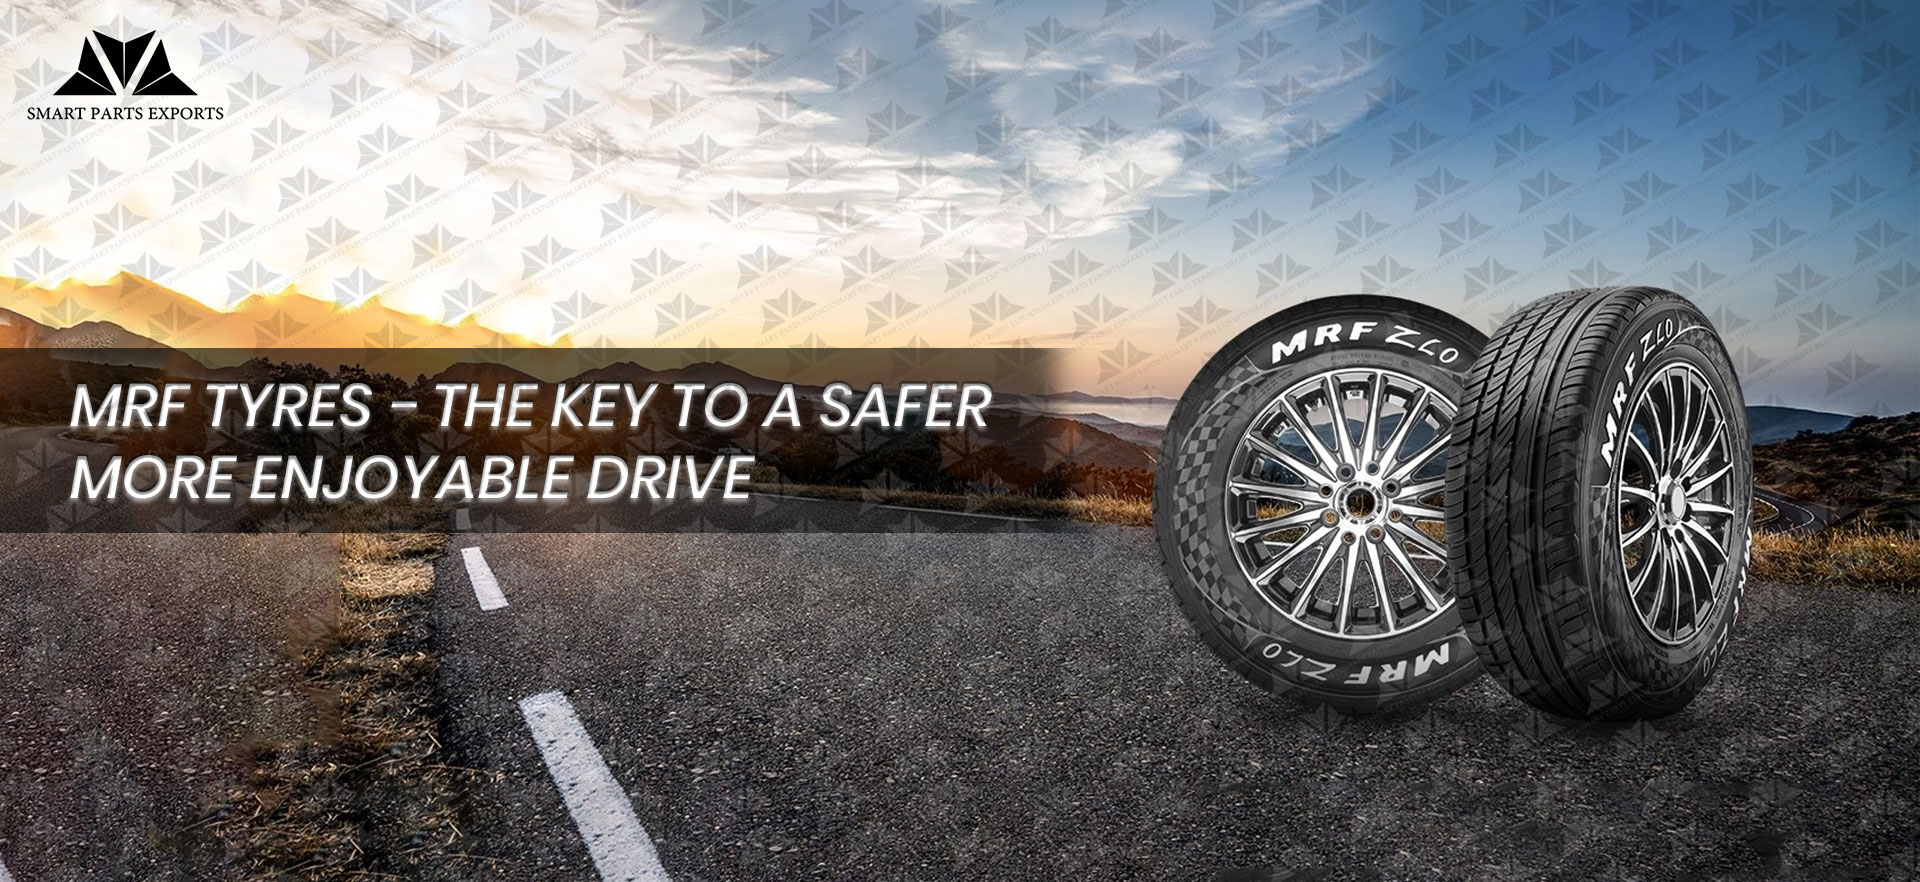 MRF Genuine Tyres - The Key to a Safer, More Enjoyable Drive